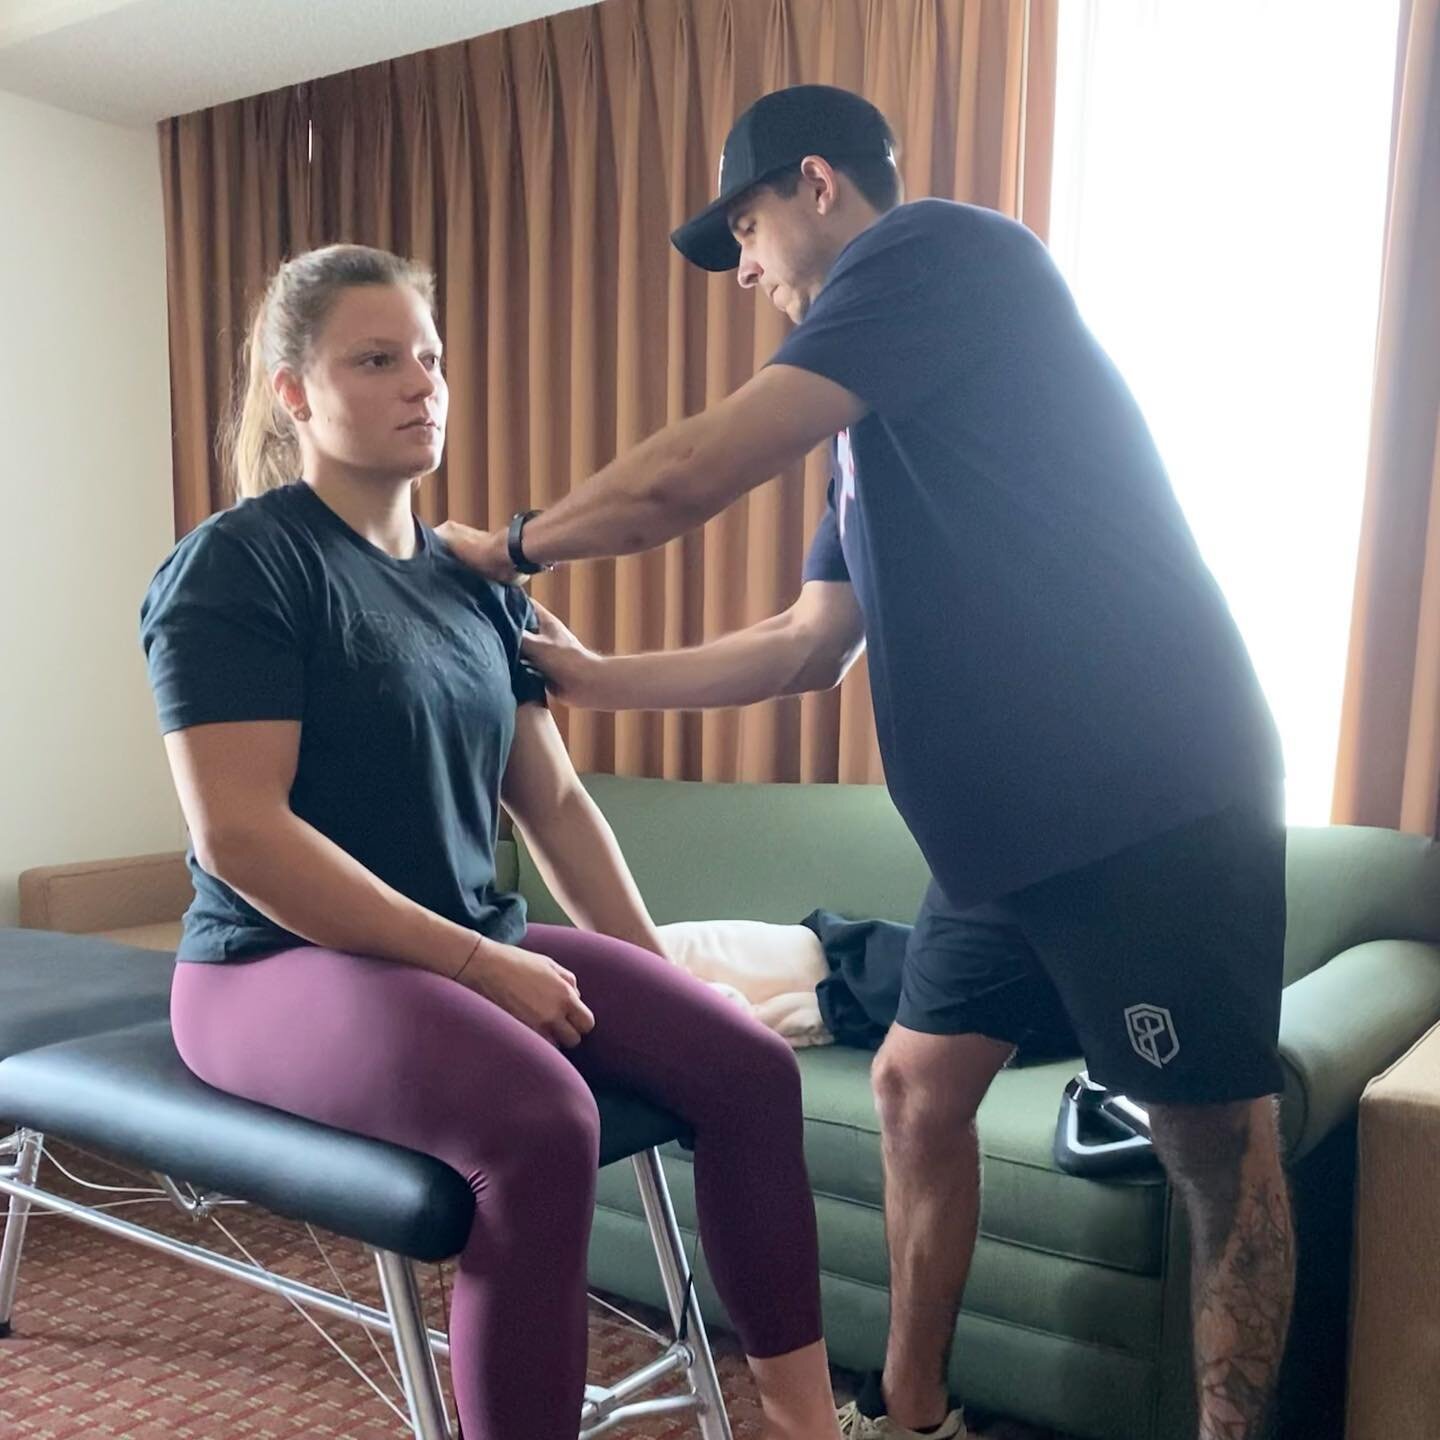 Off day today at the @crossfitgames for @laurahorvaht before 3 heavy days of competition. Making sure she is feeling good and recovered! #crossfitgames #crossfit #recovery #activereleasetechnique #tidewatersportstherapy